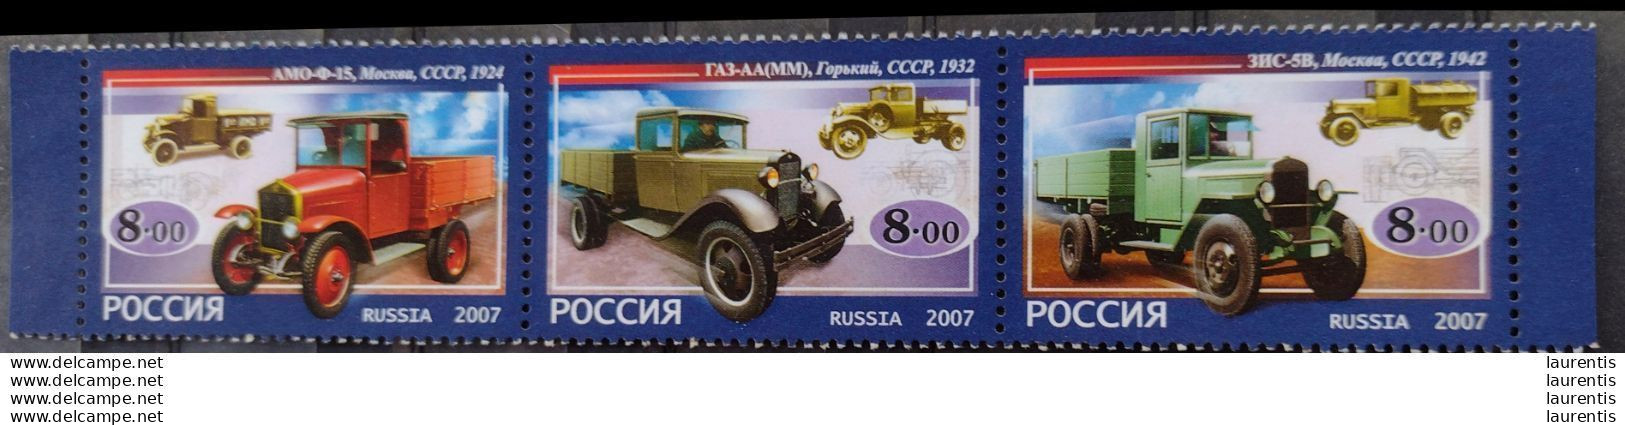 D7467. Trucks - Camions - Russia Yv 7016-18 MNH - 0,95 (3) - Vrachtwagens